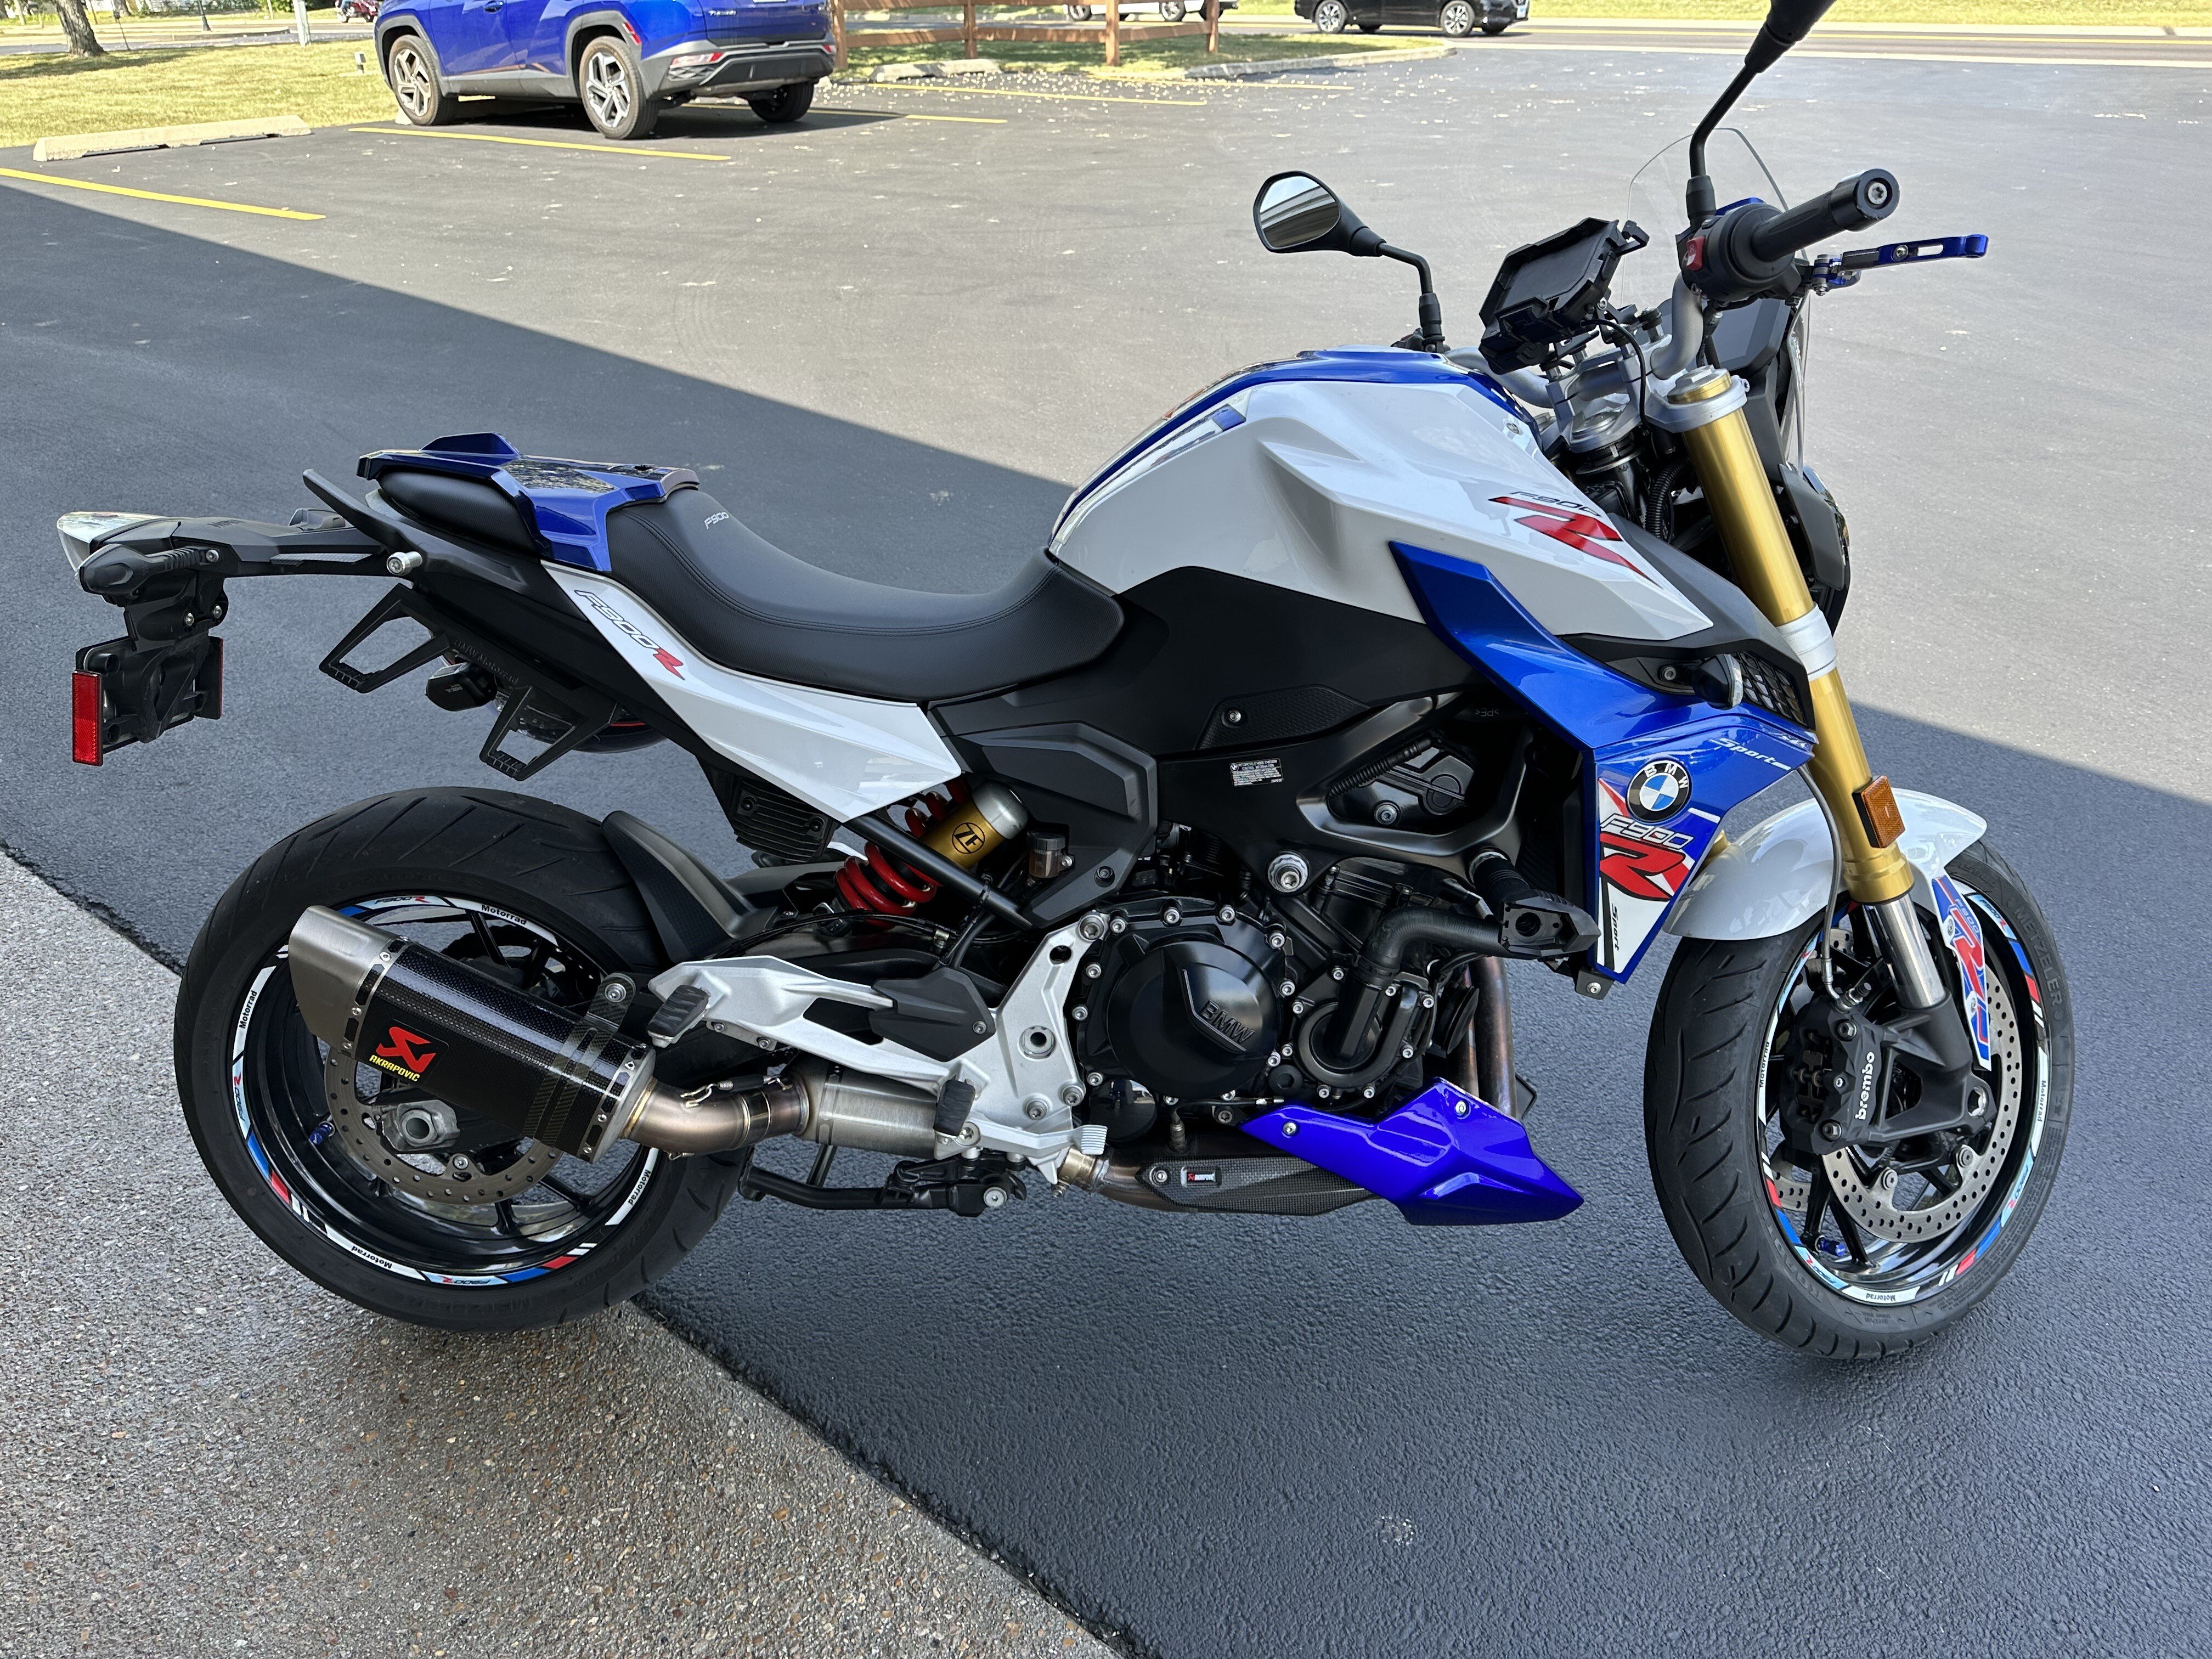 2021 BMW F900R for sale near Vista, California 92081 - 201538217 -  Motorcycles on Autotrader